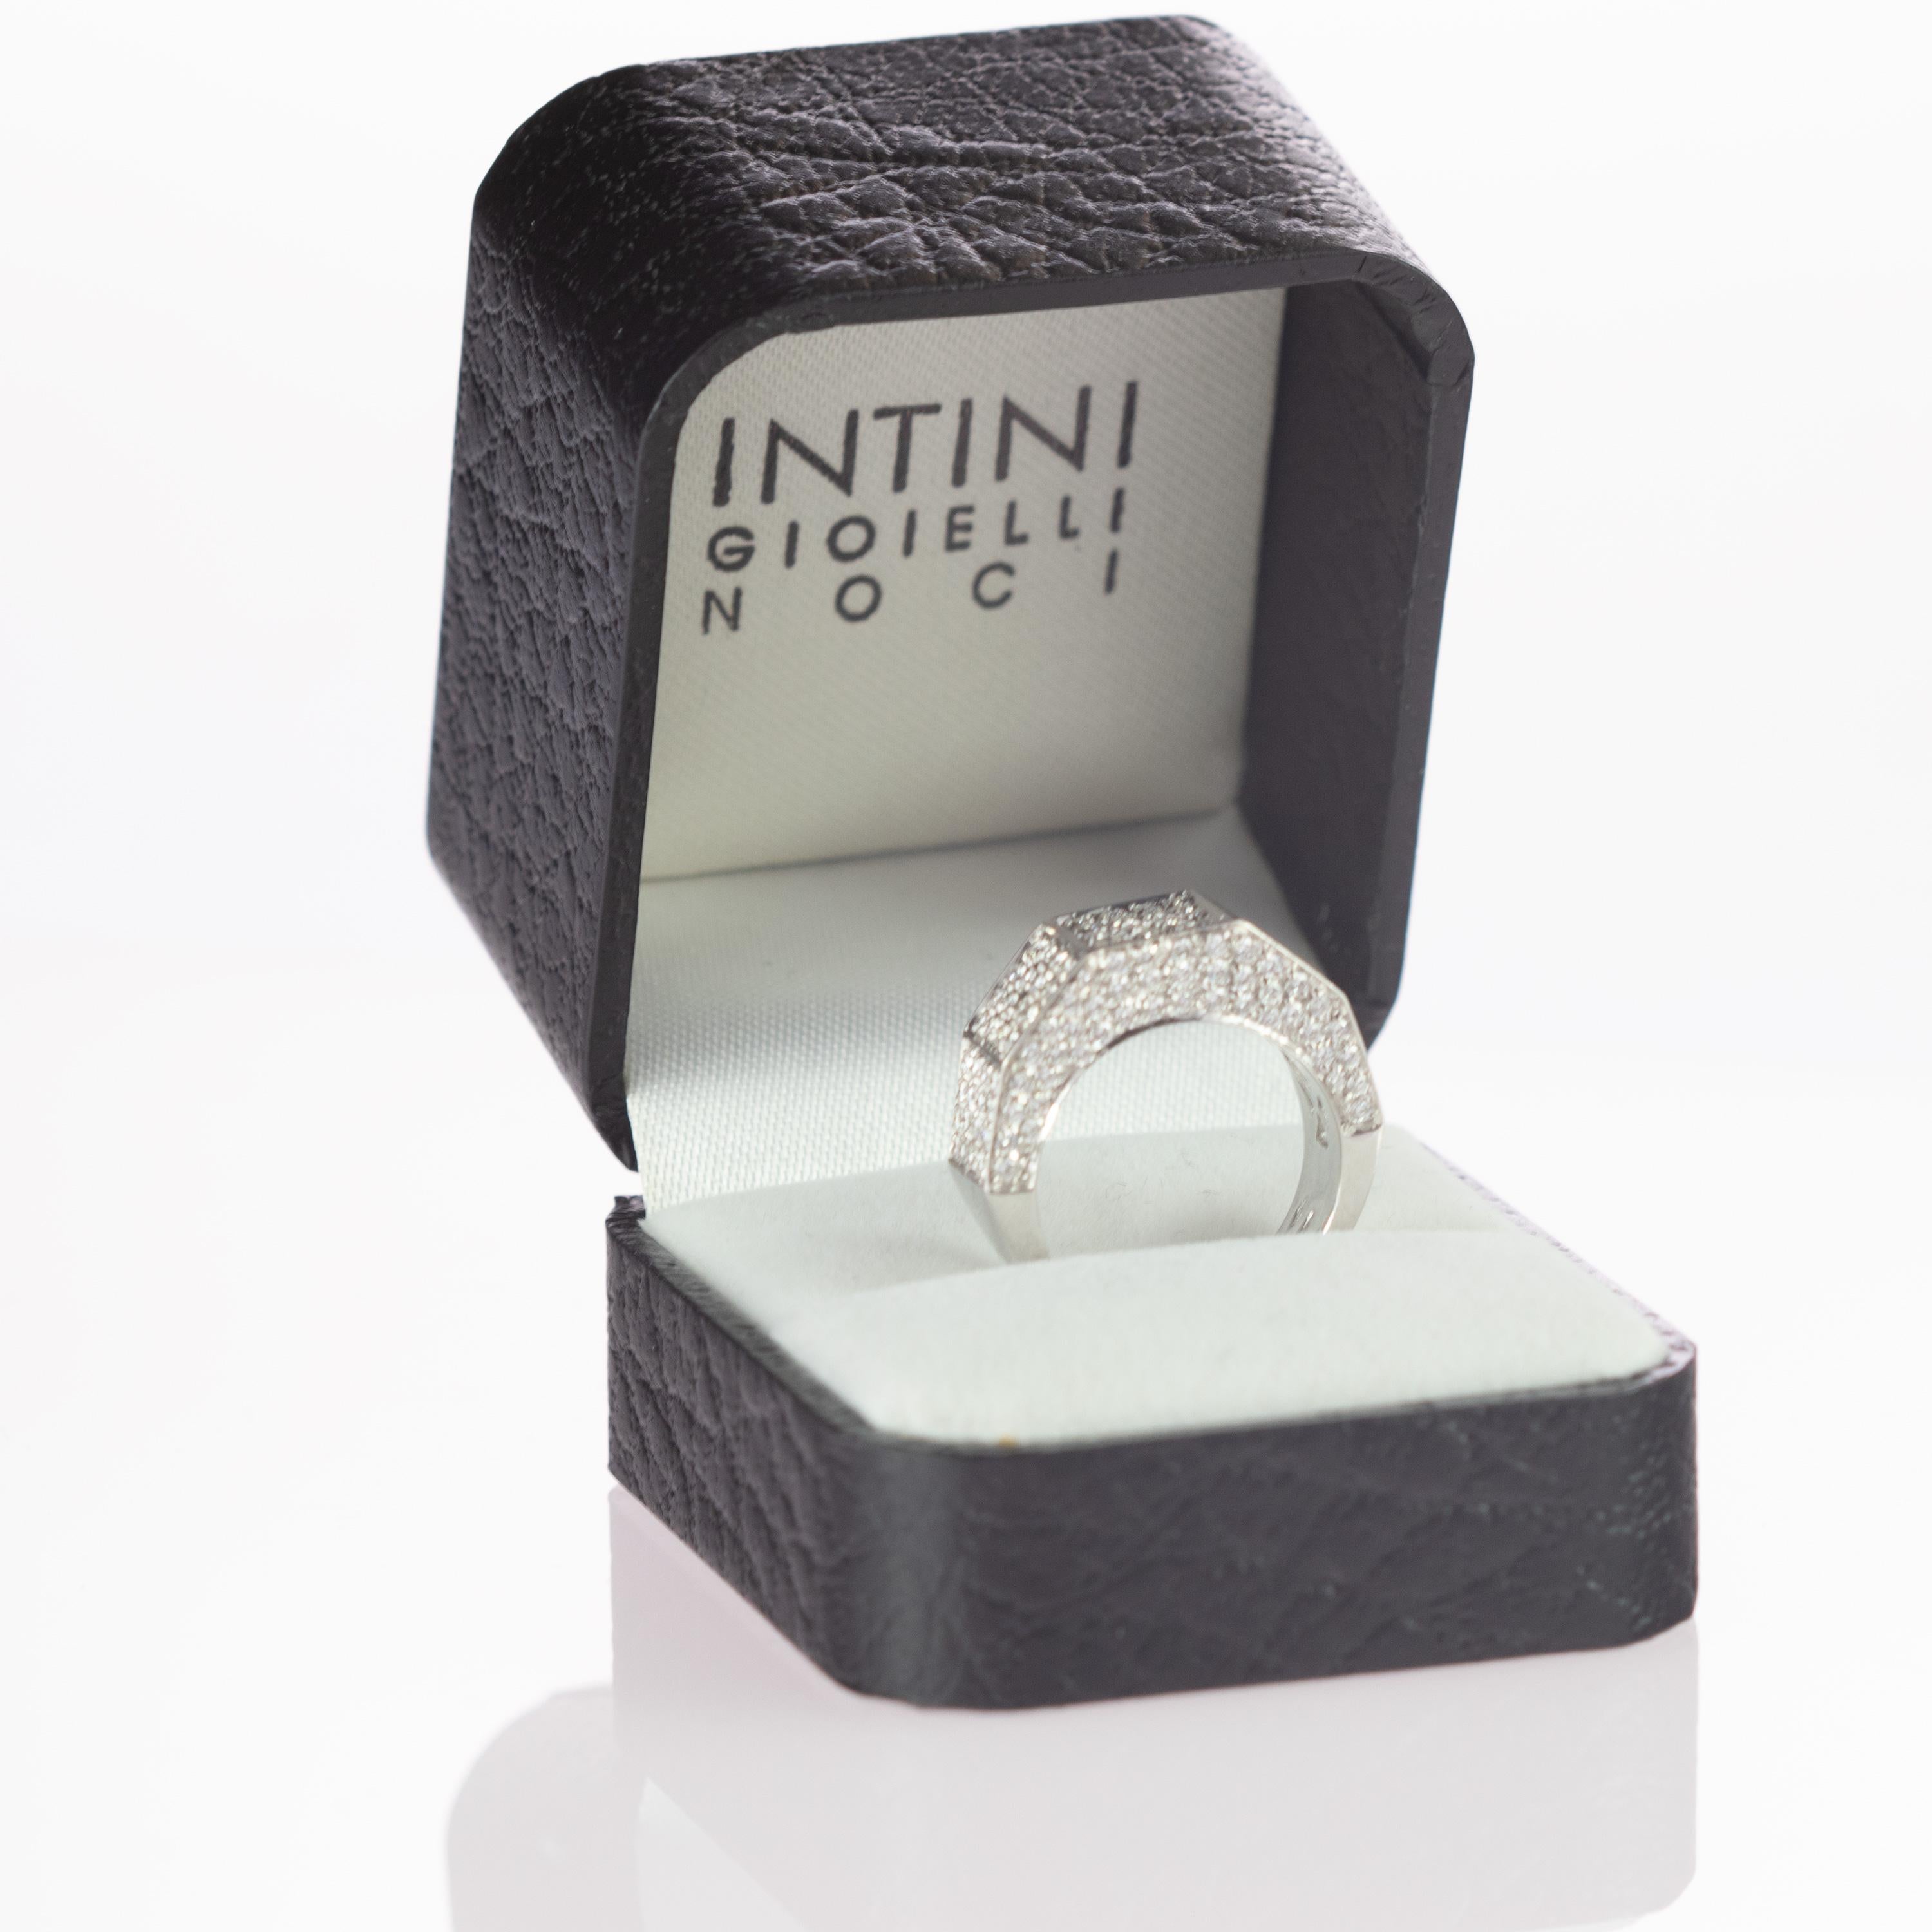 Rare and magnificent band ring with 1.57 diamond carats, helded in a 18 karat white gold. The ring has an exquisite and glamorous geometric design of a cluster of brilliant cut diamonds
 
At intini all our jewels have a personality and a story